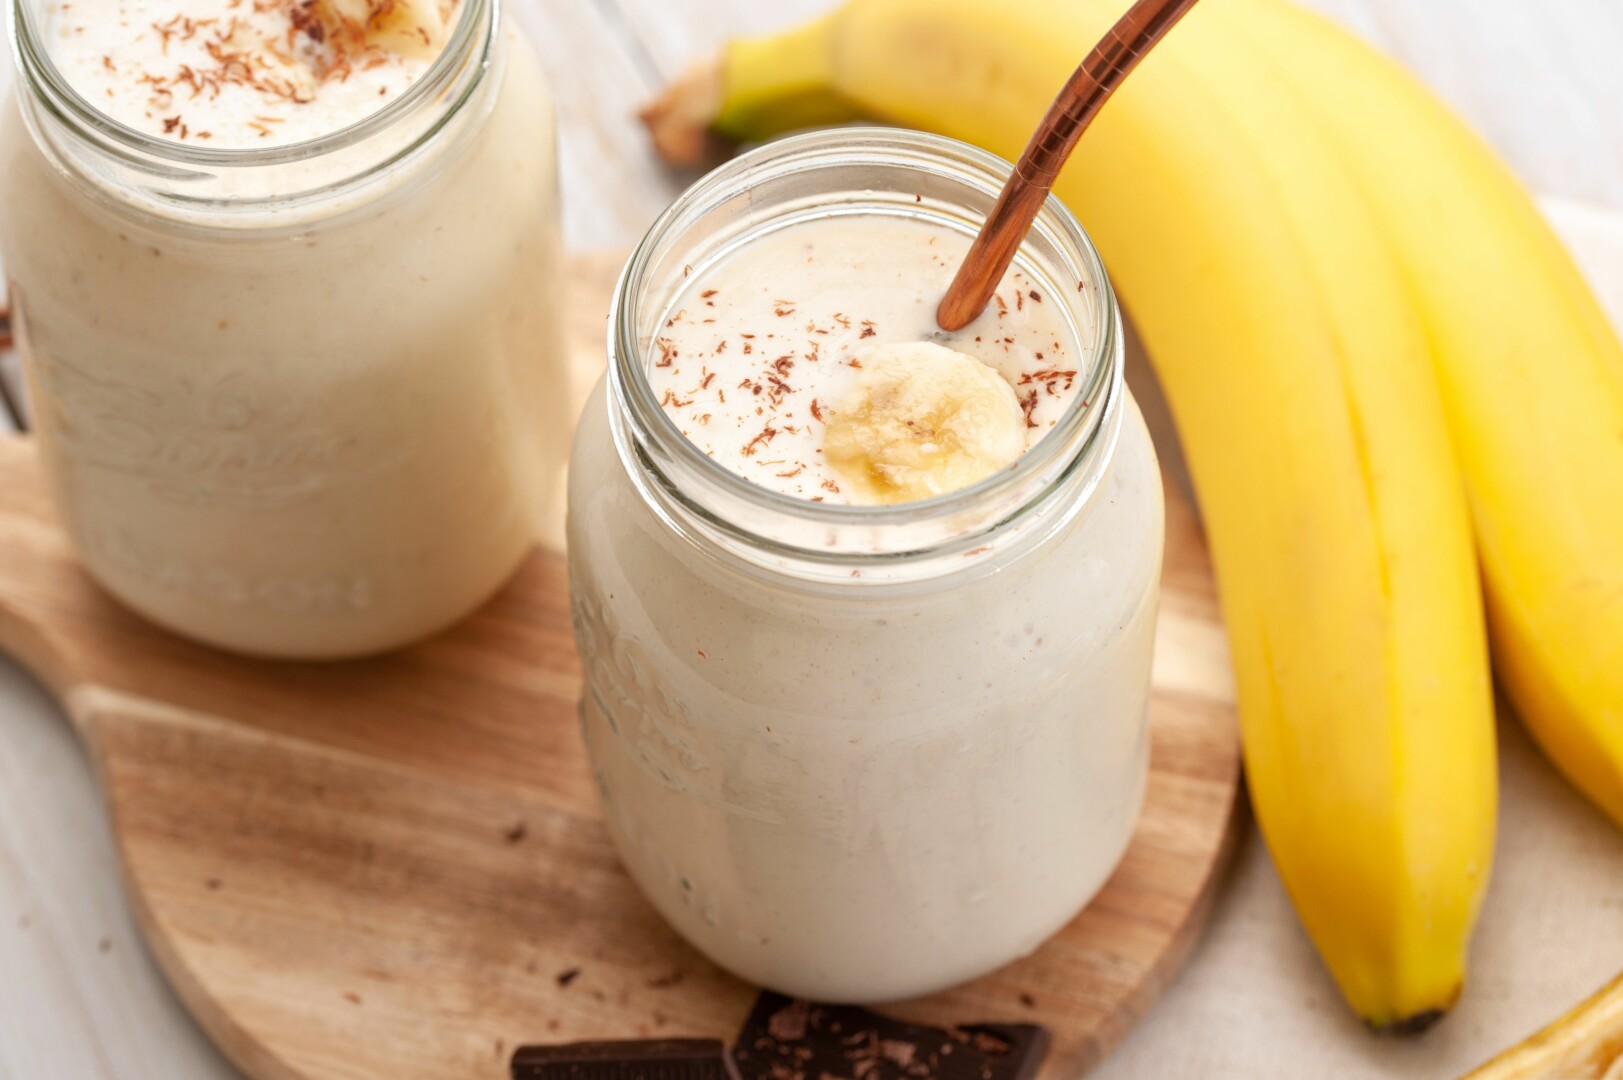 banana smoothie recipes 759606 hero 01 d2abaa79f3204030a0ec0a8940456acc scaled